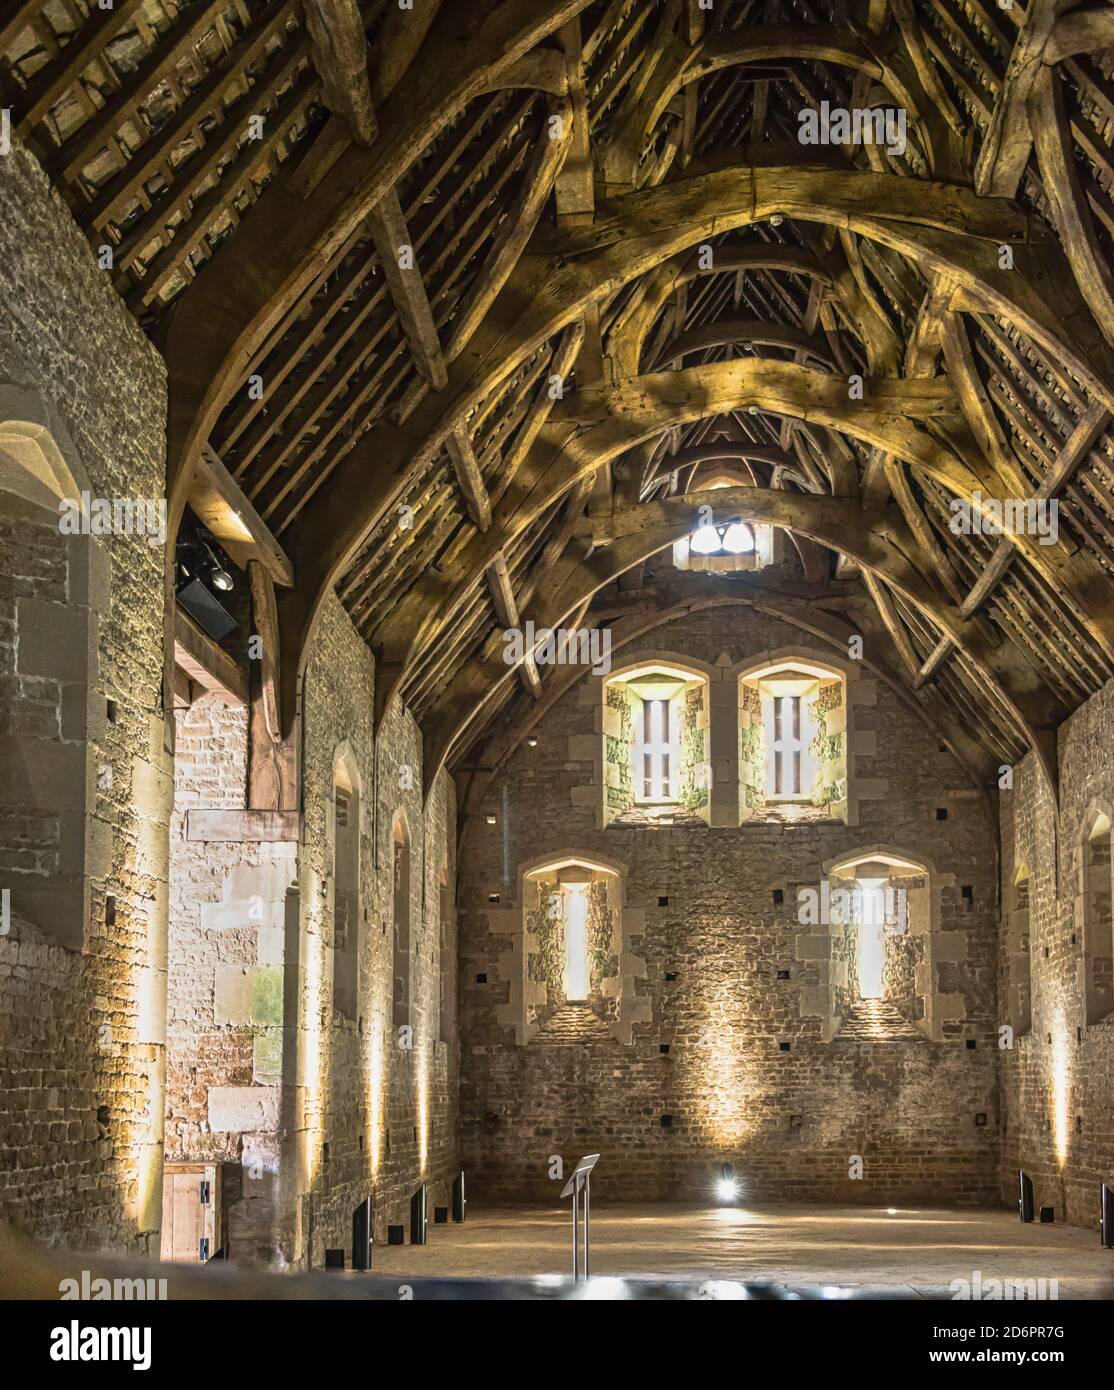 Interior view, Glastonbury, England. Somerset Rural Life Museum. Also known as Abby Barn. Medieval Architecture. No people. Cruck (curved) trusses. Stock Photo